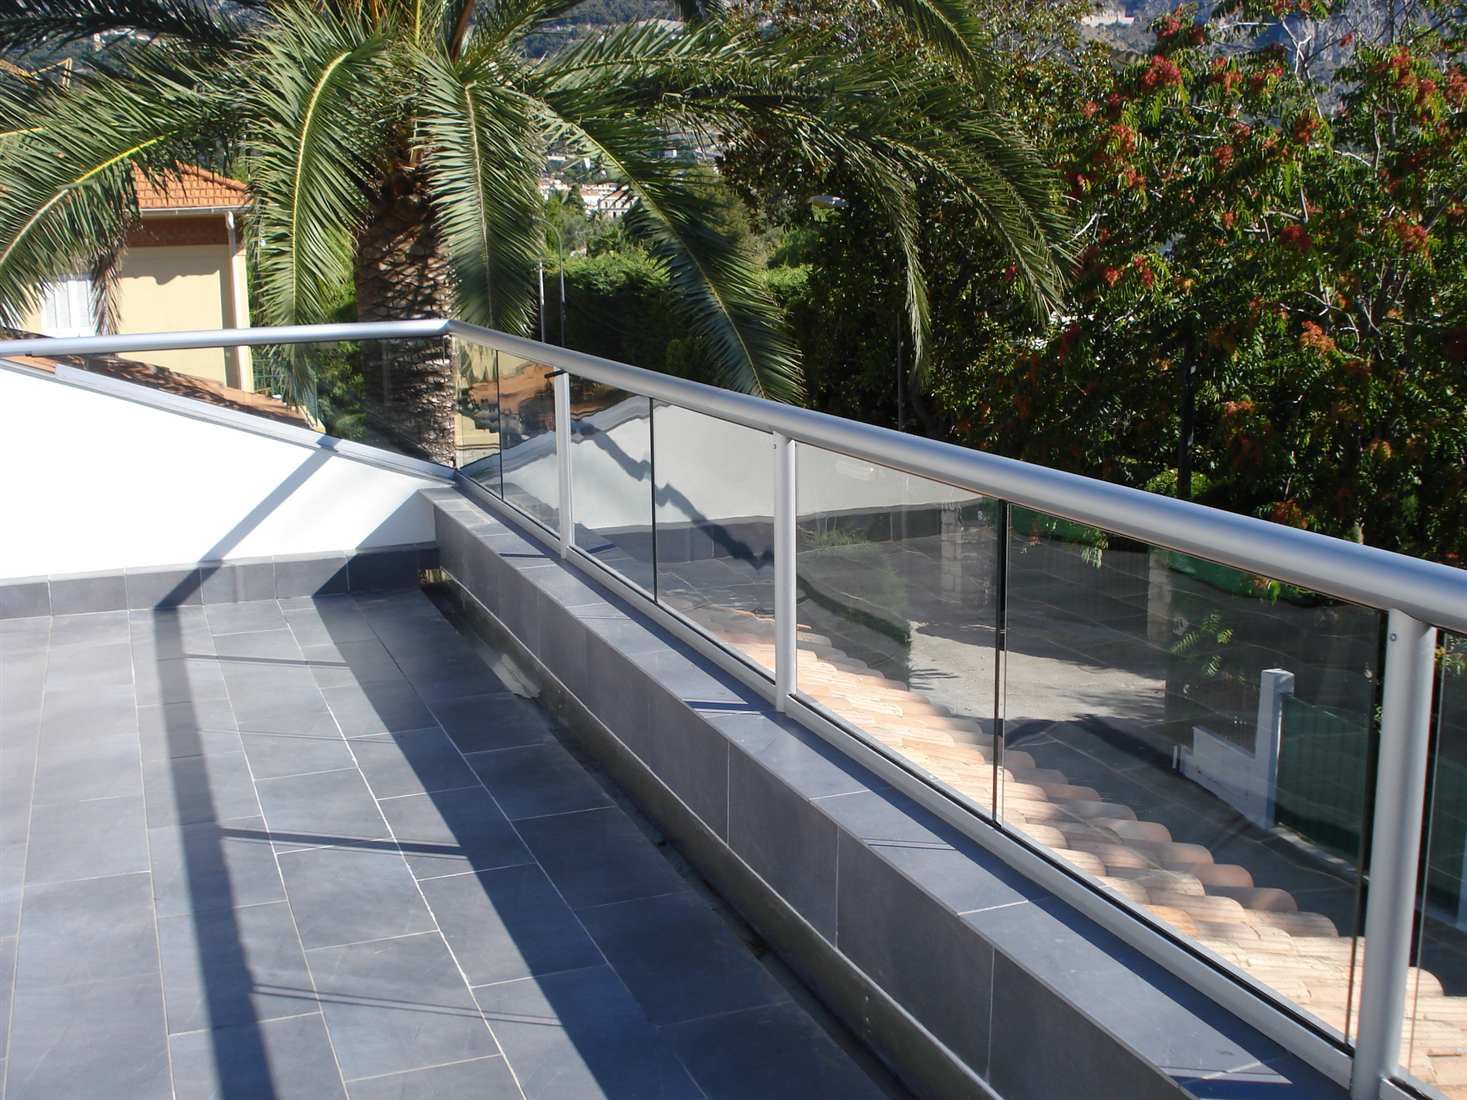  Silver Orbit Glass Balustrade looking over a sunny garden with a palm tree